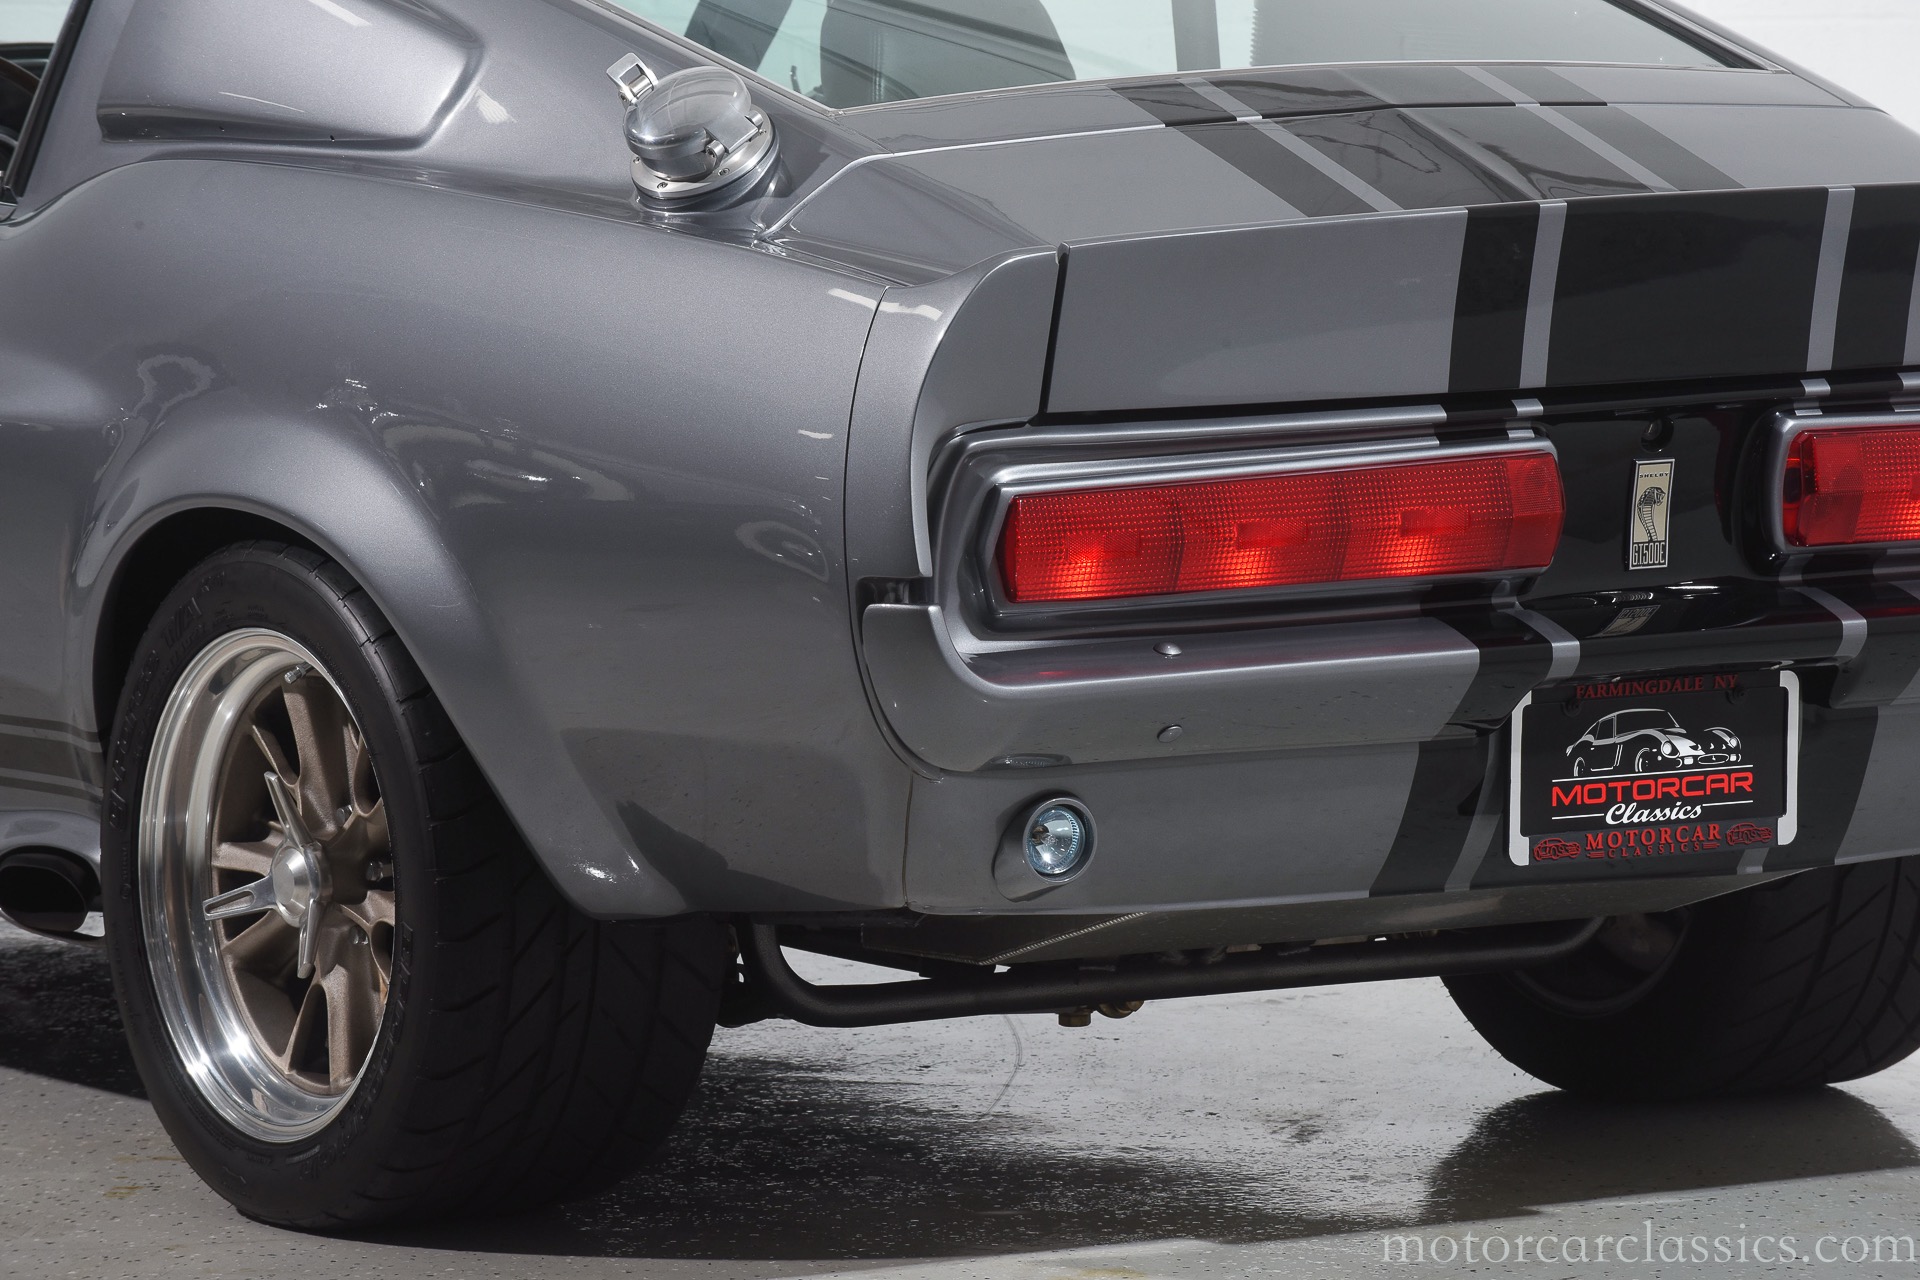 Used 1967 Ford Shelby Mustang Gt500e Super Snake For Sale Special